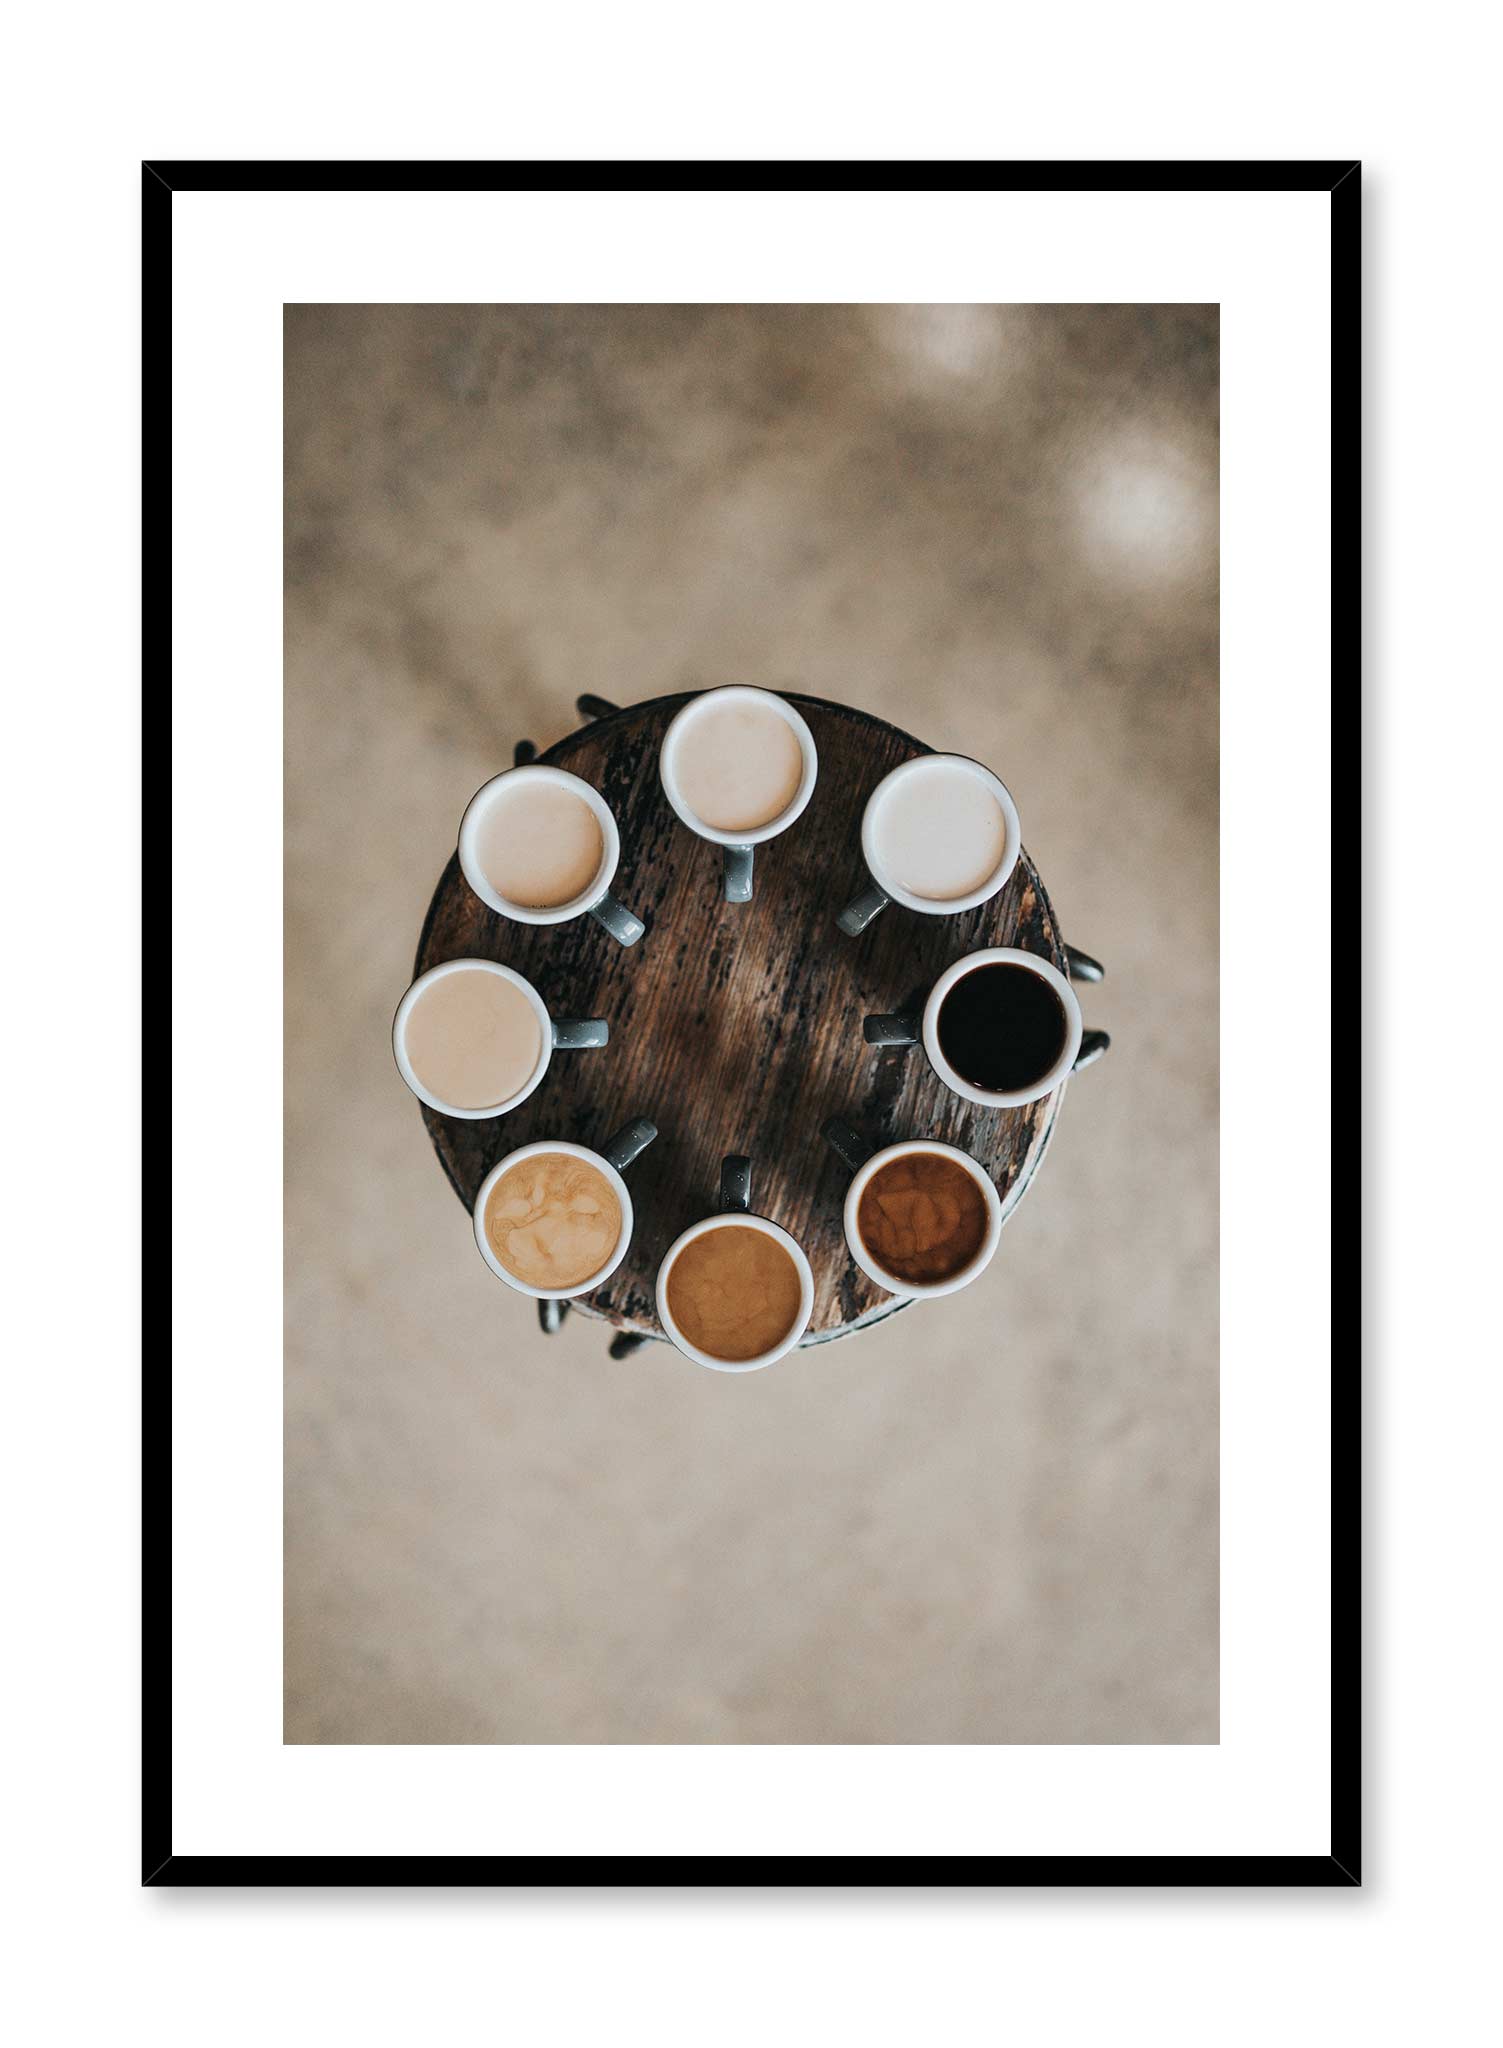 Caffeine Wheel is a coffee photography poster by Opposite Wall.